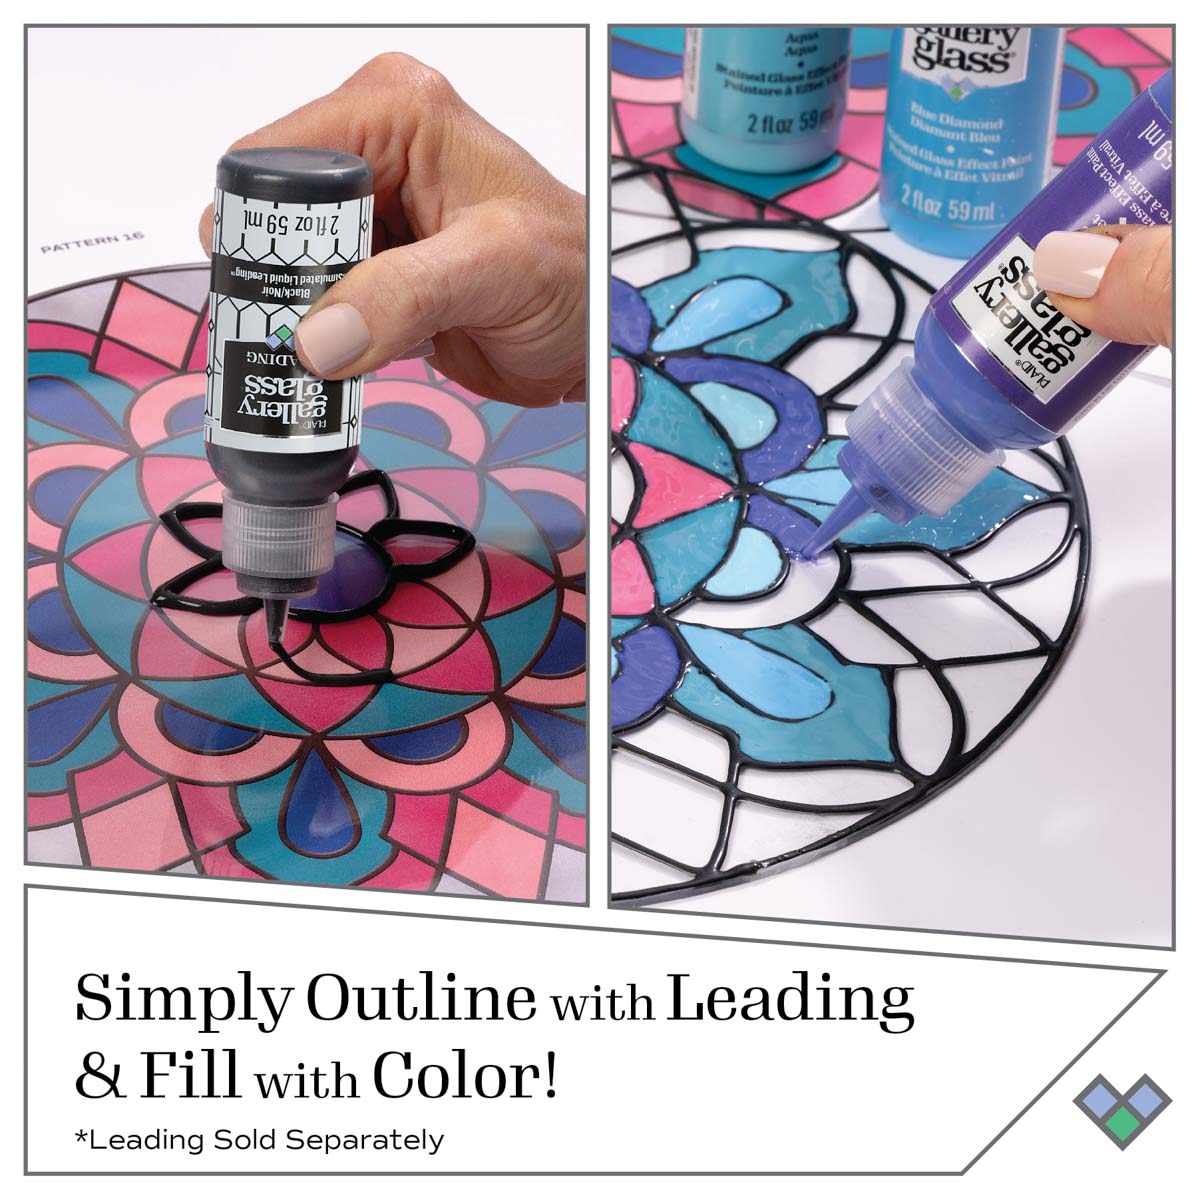 Gallery Glass ® Metallic™ Stained Glass Effect Paint - Platinum, 2 oz. - 19680